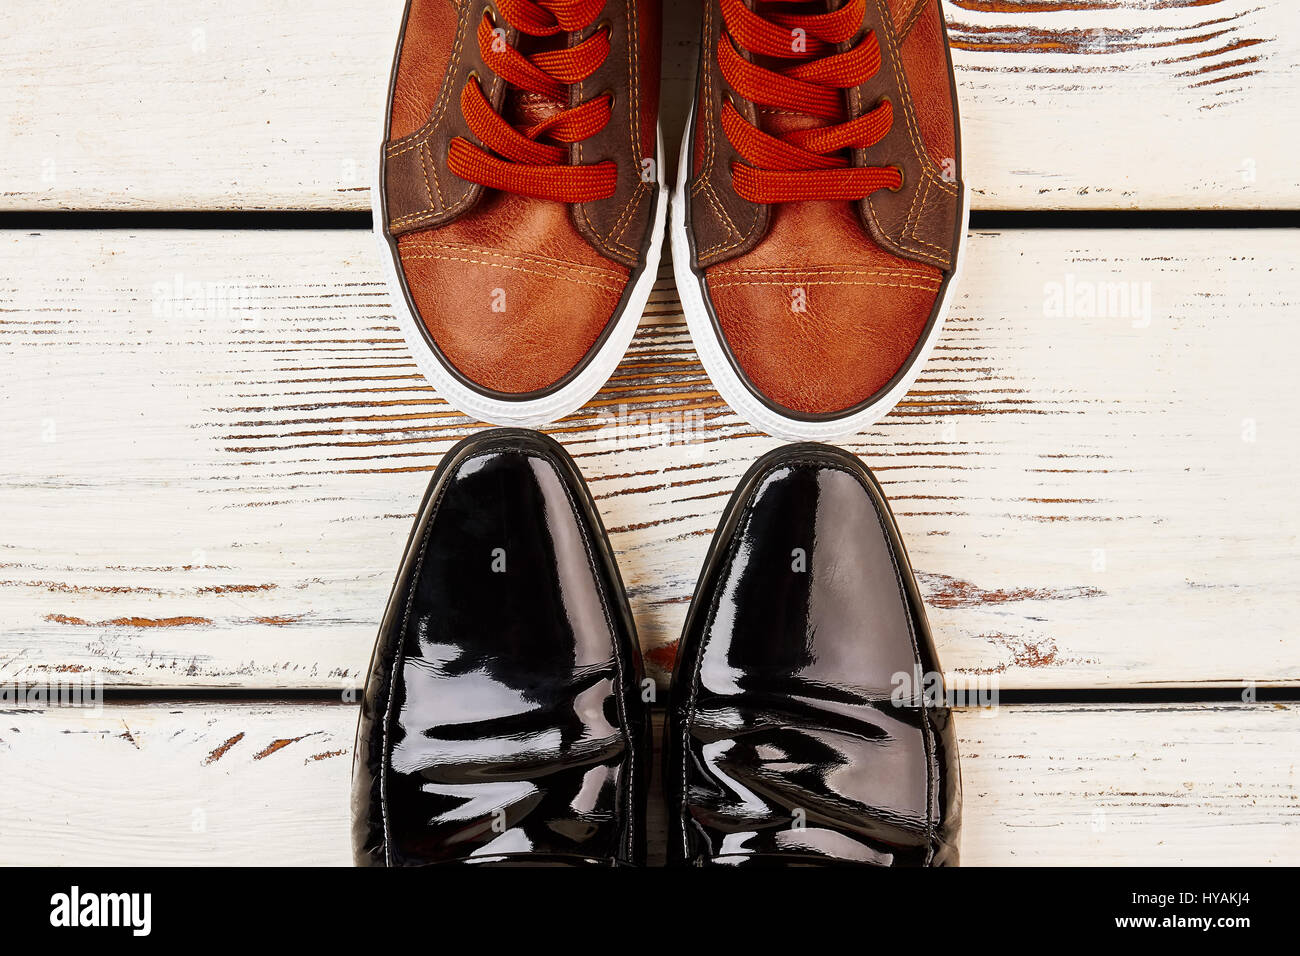 Patent-leather shoes and keds. Stock Photo